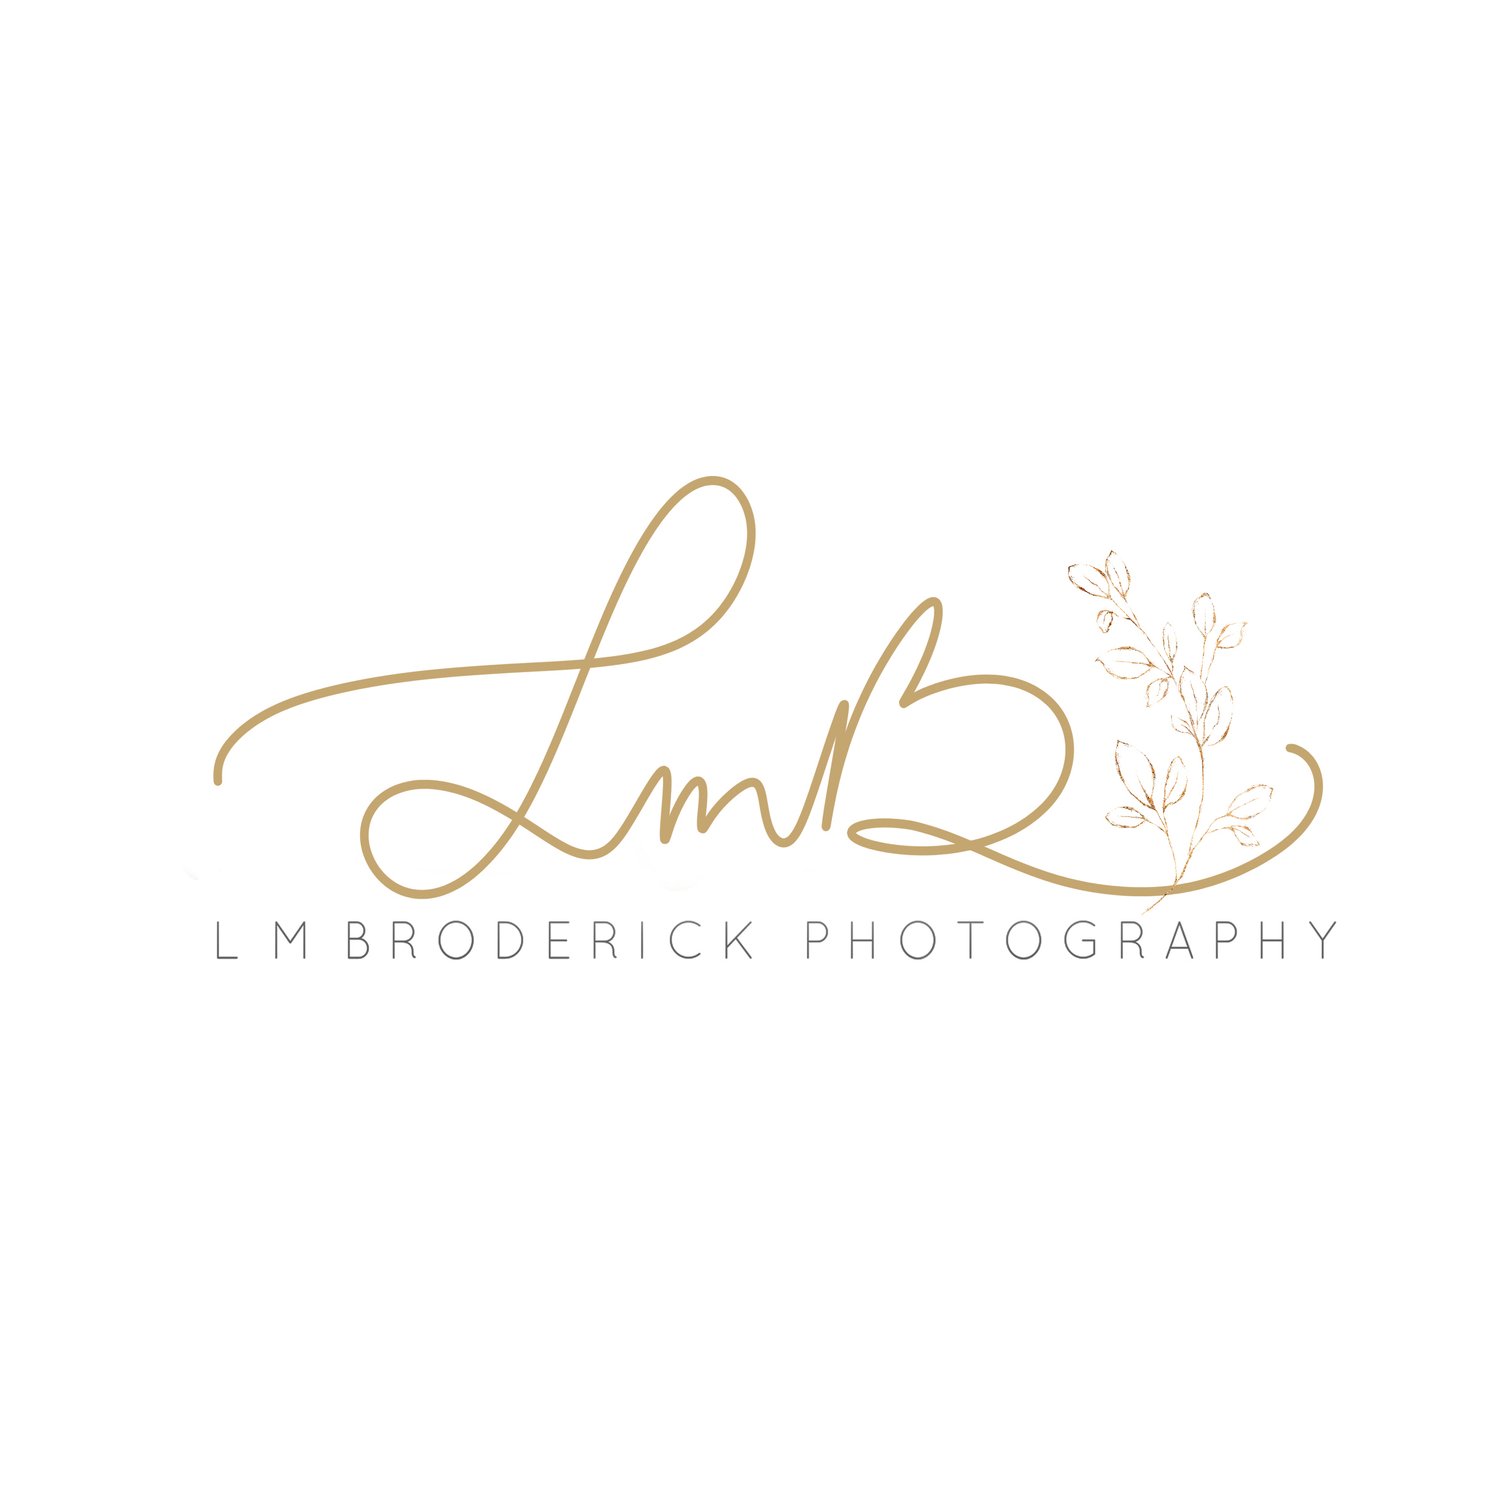 L.M.Broderick Photography